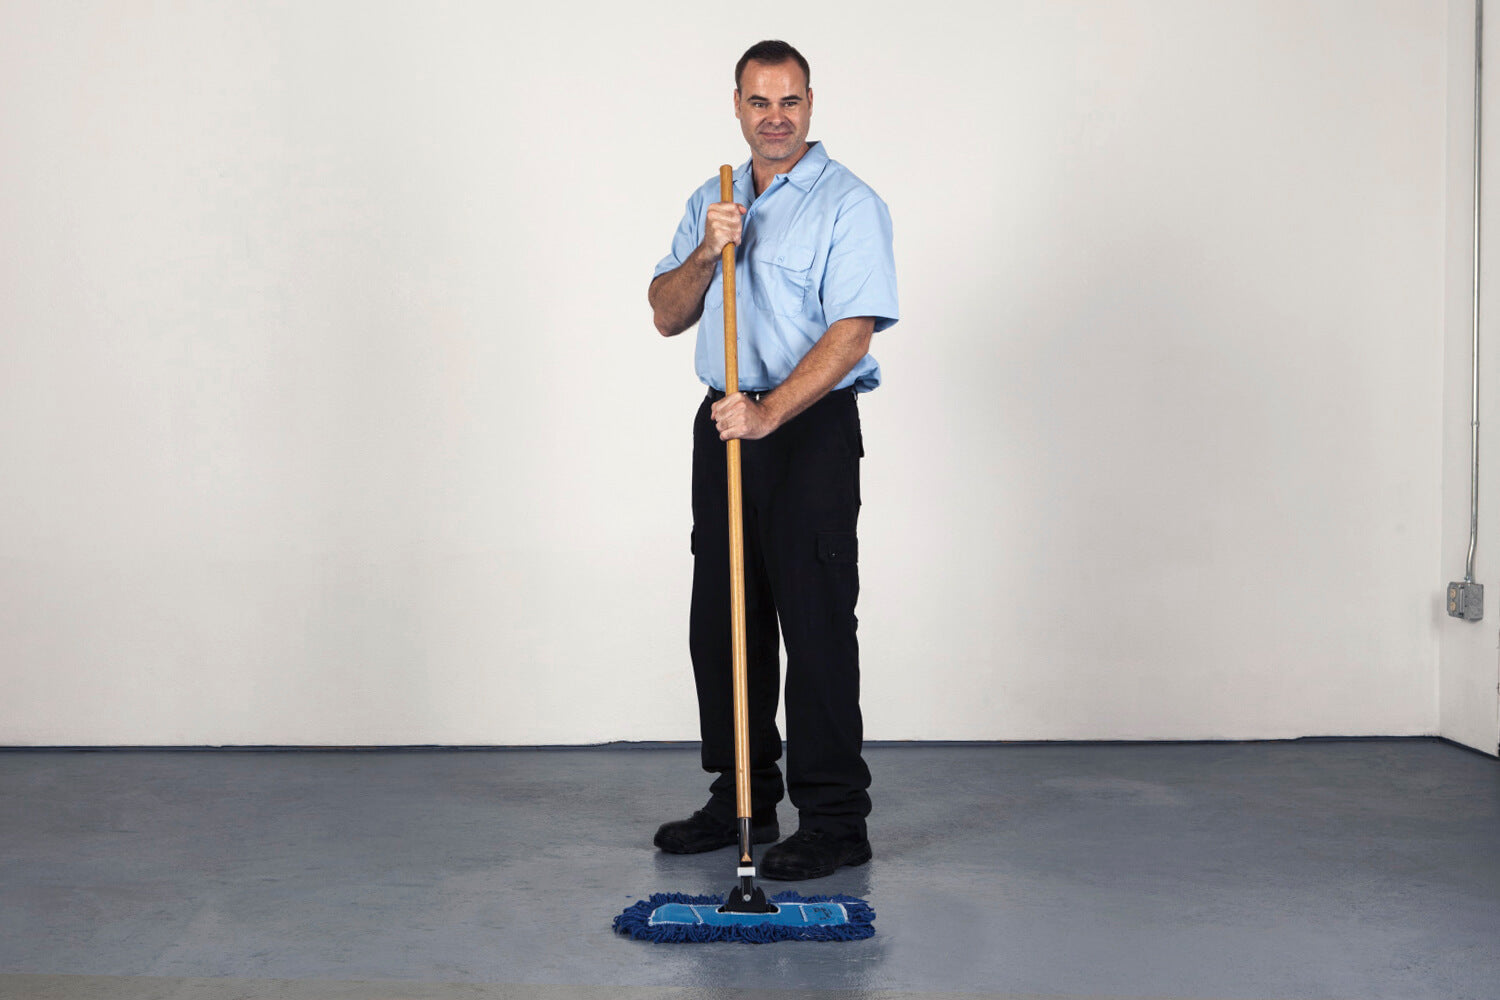 18 inch professional dust mop